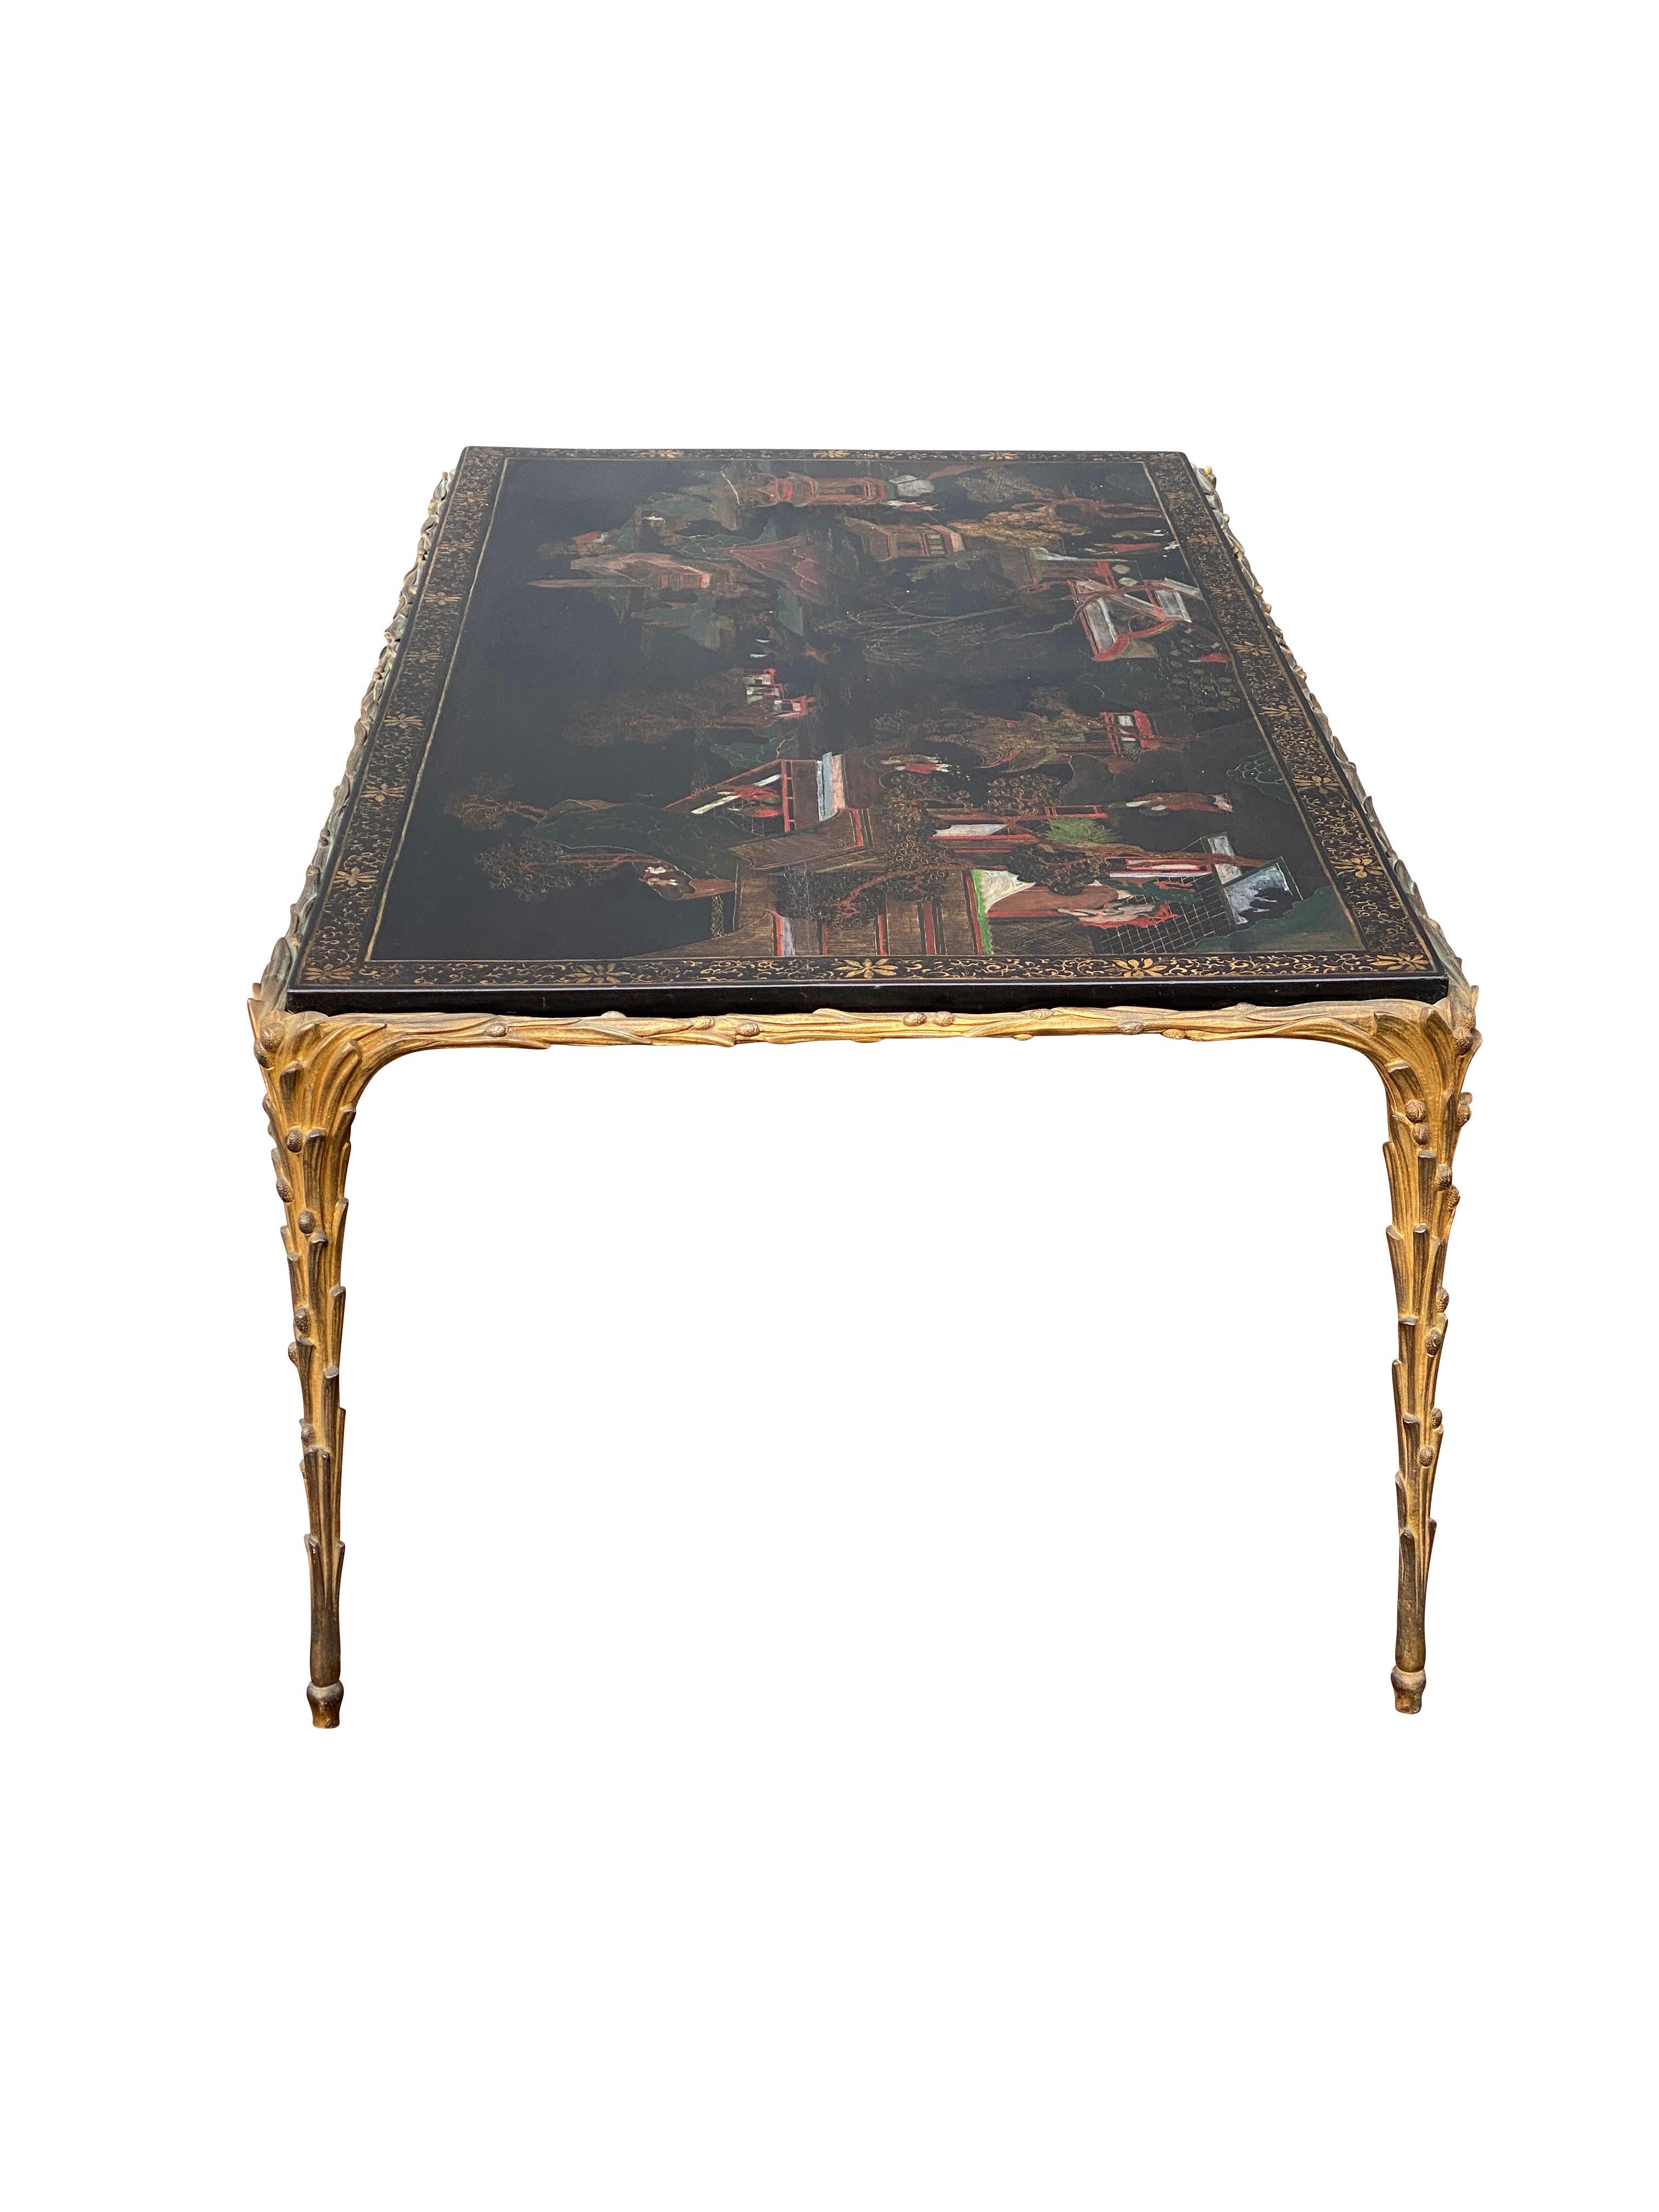 French Maison Jansen Chinoiserie and Gilt Bronze Coffee Table